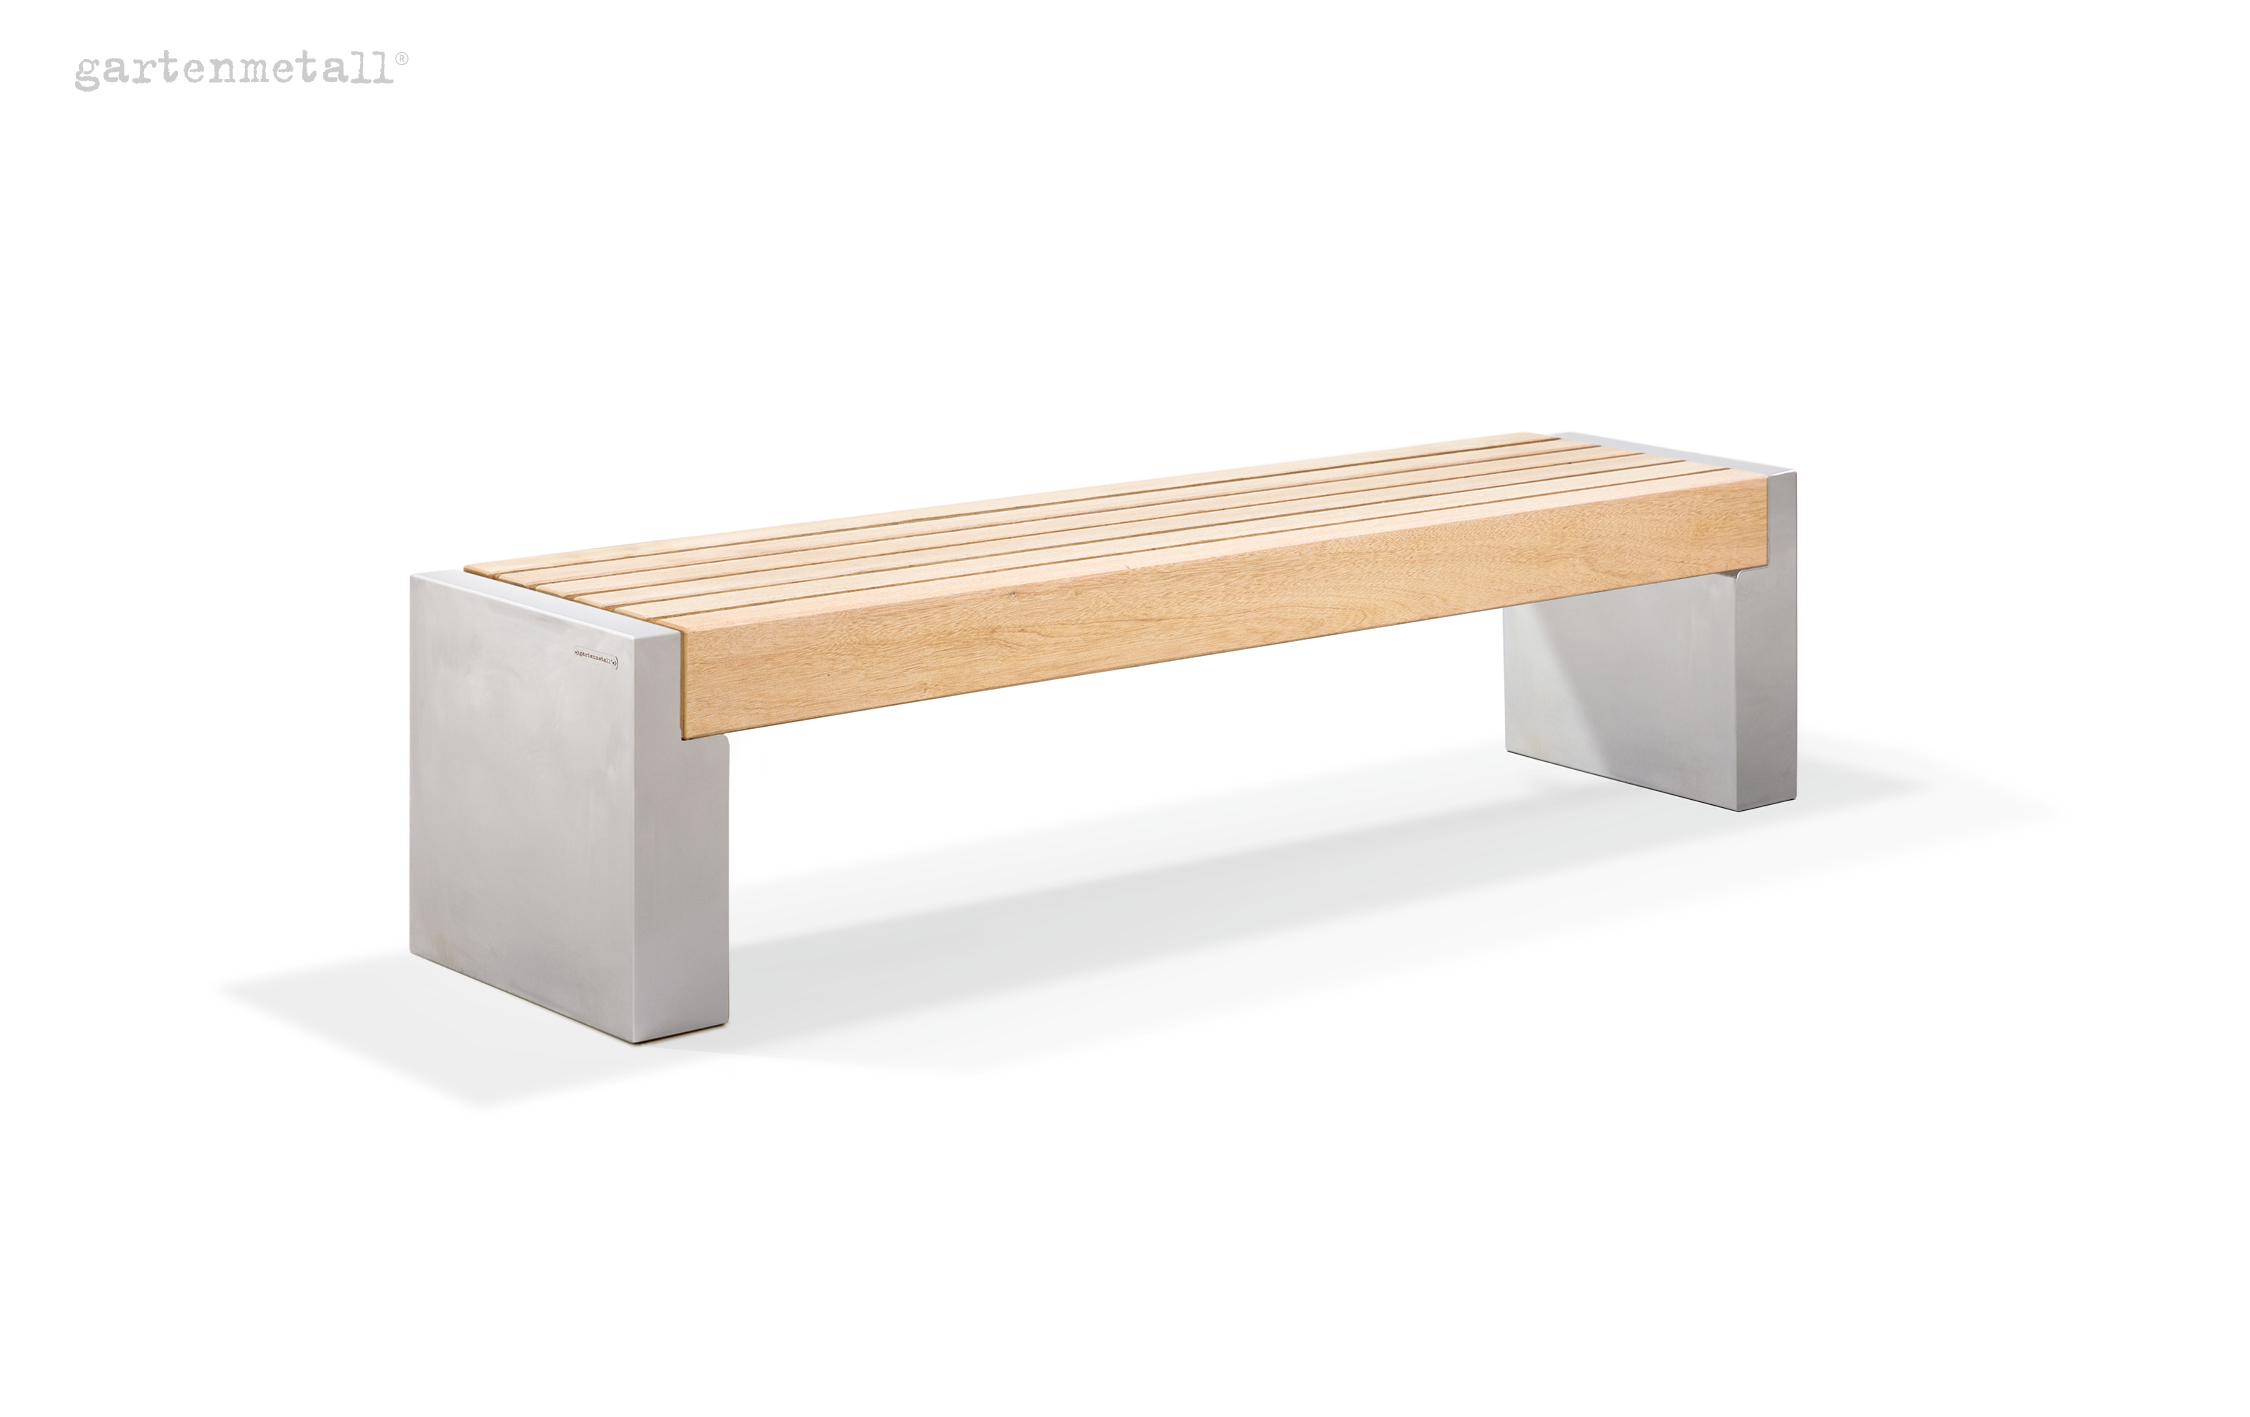 Bench type EMDEN 2.0 m with seat support hardwood